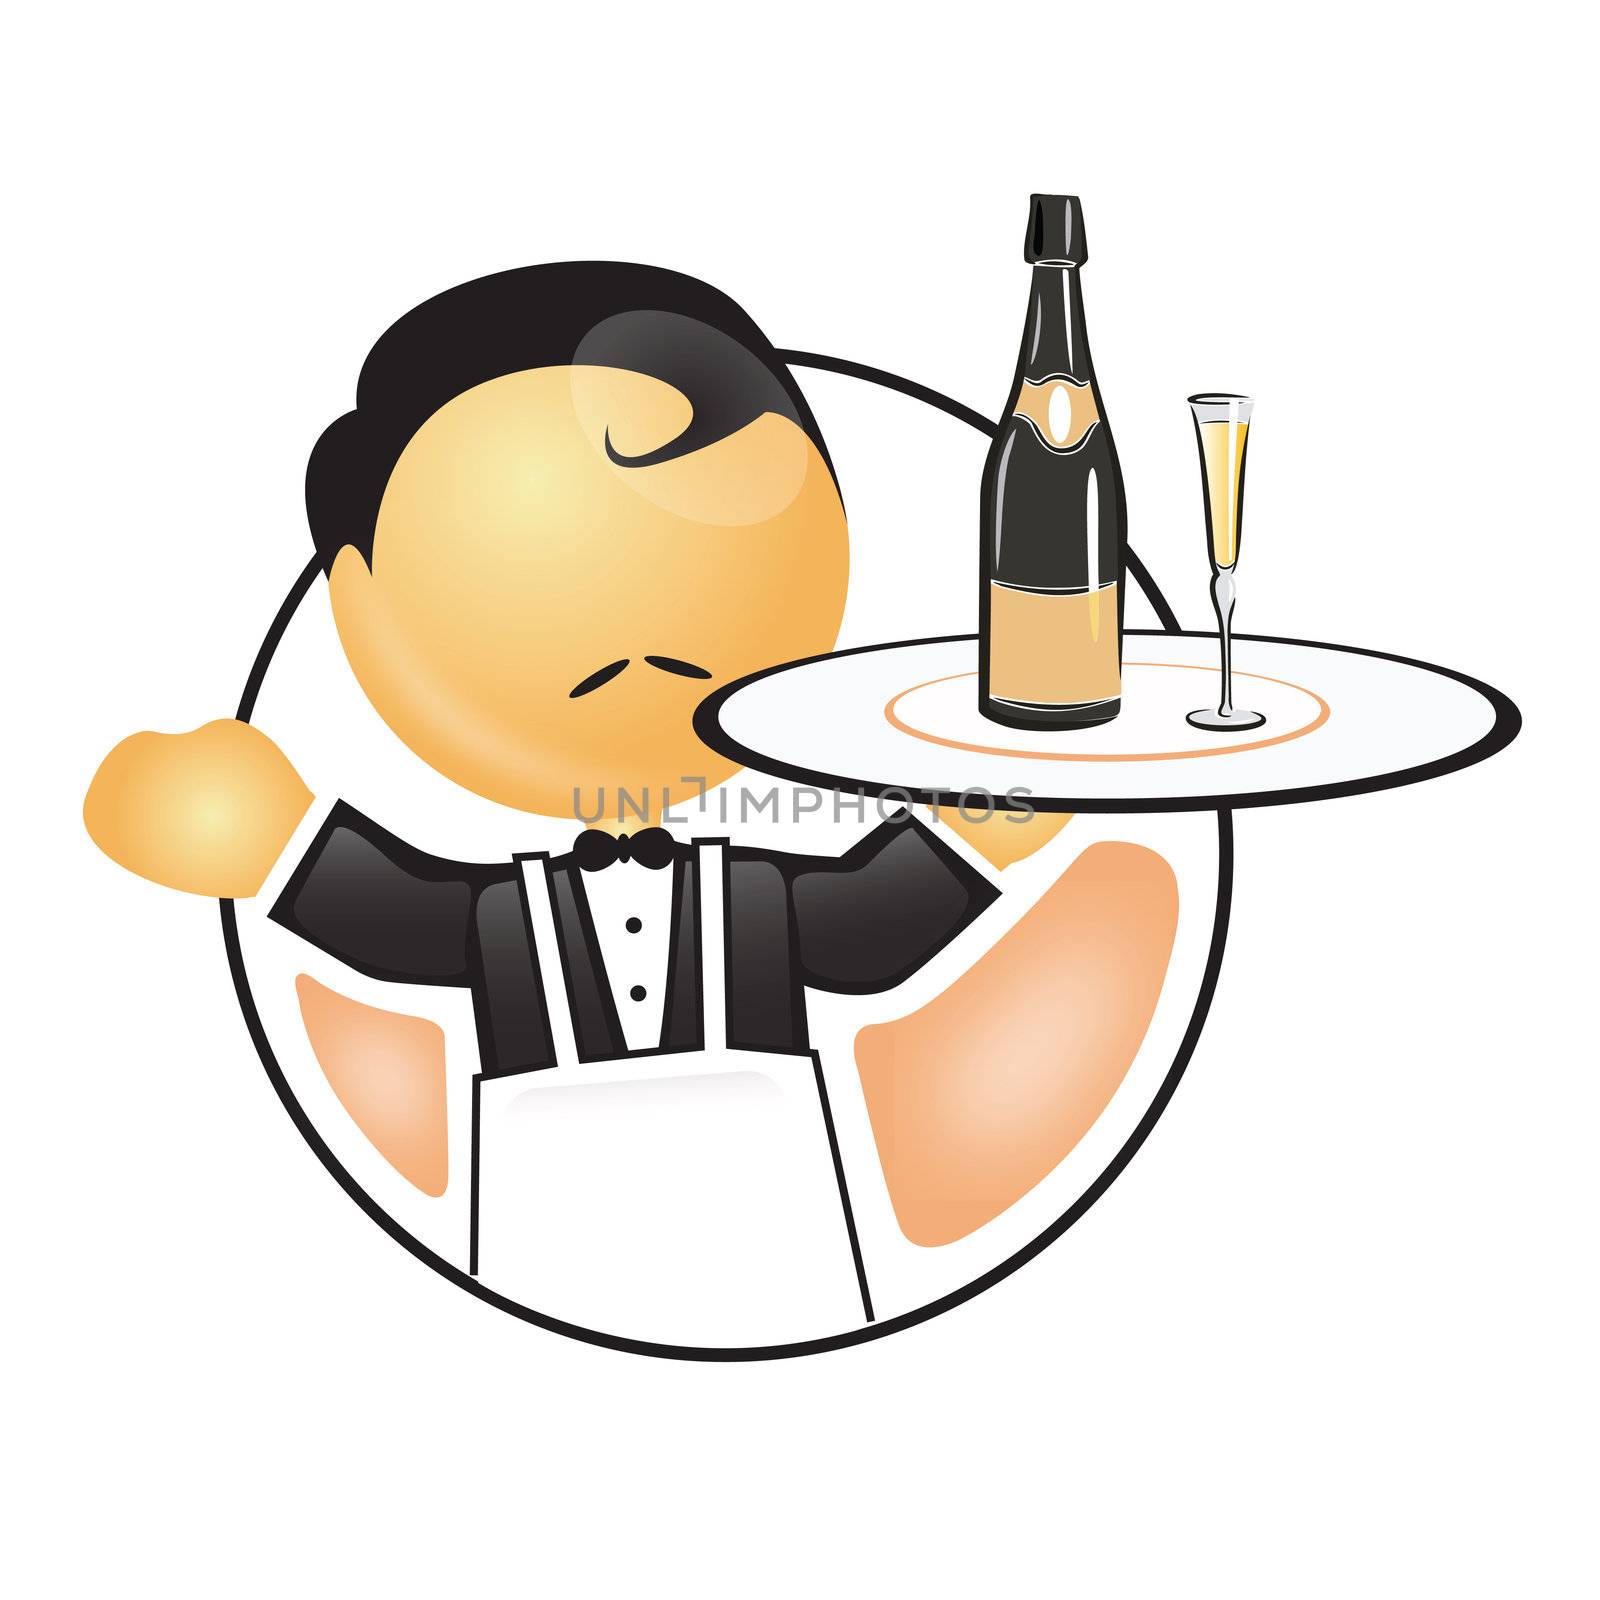 waiter holding a tray with wine and glass
